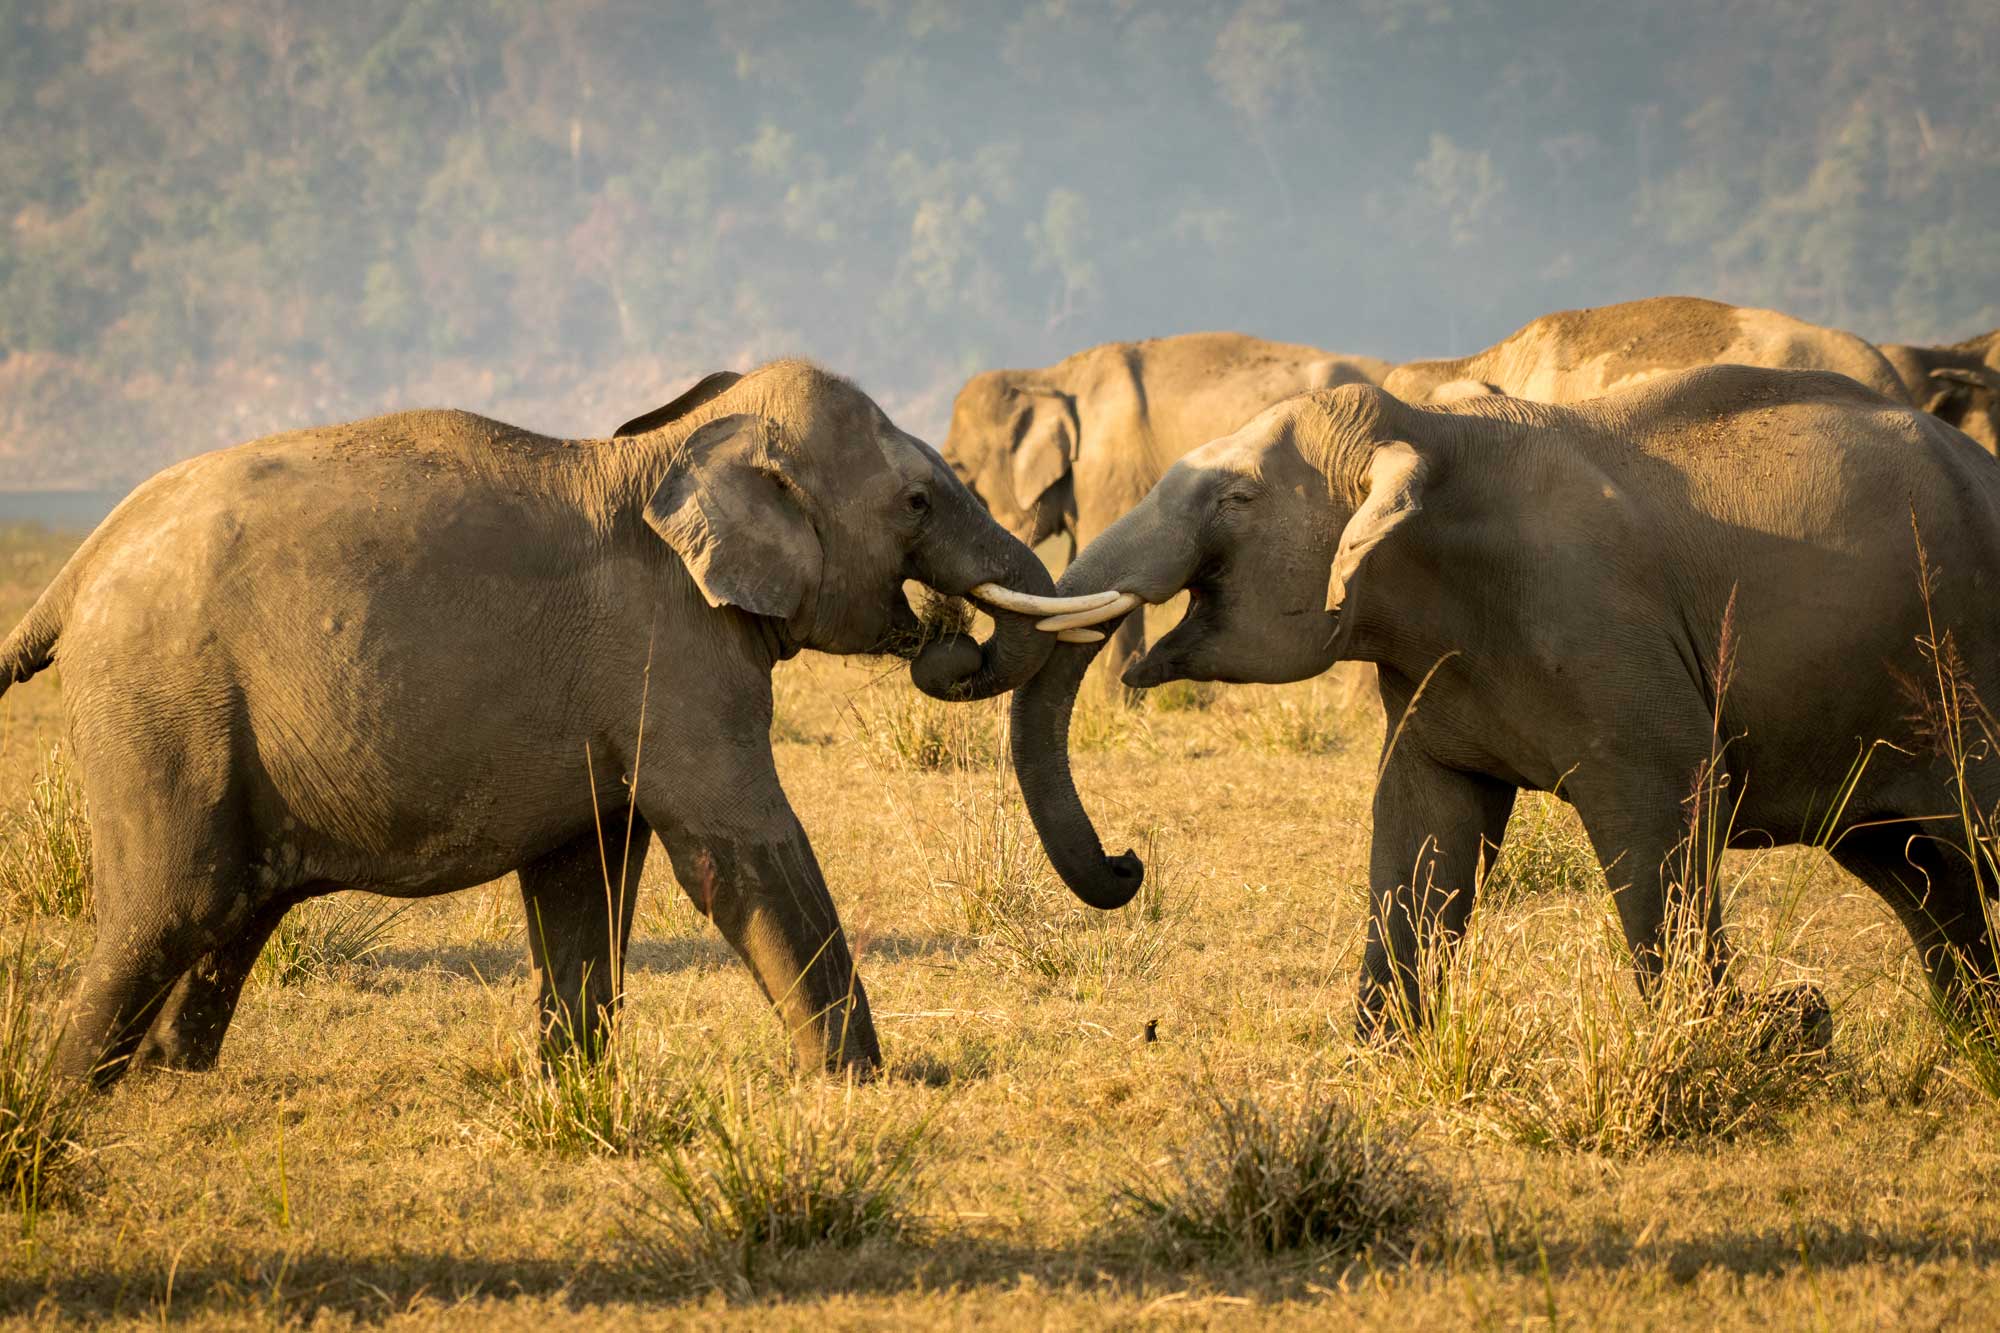 Photograph of Indian elephants at Dhikala grassland, Jim Corbett National Park, Uttarakhand, India. The photo shows two elephants with locked tusks in the foreground, with more elephants partially visible in the background. The elephants stand in a flat grassy landscape. Part of a vegetated hill can be seen rising in the background.